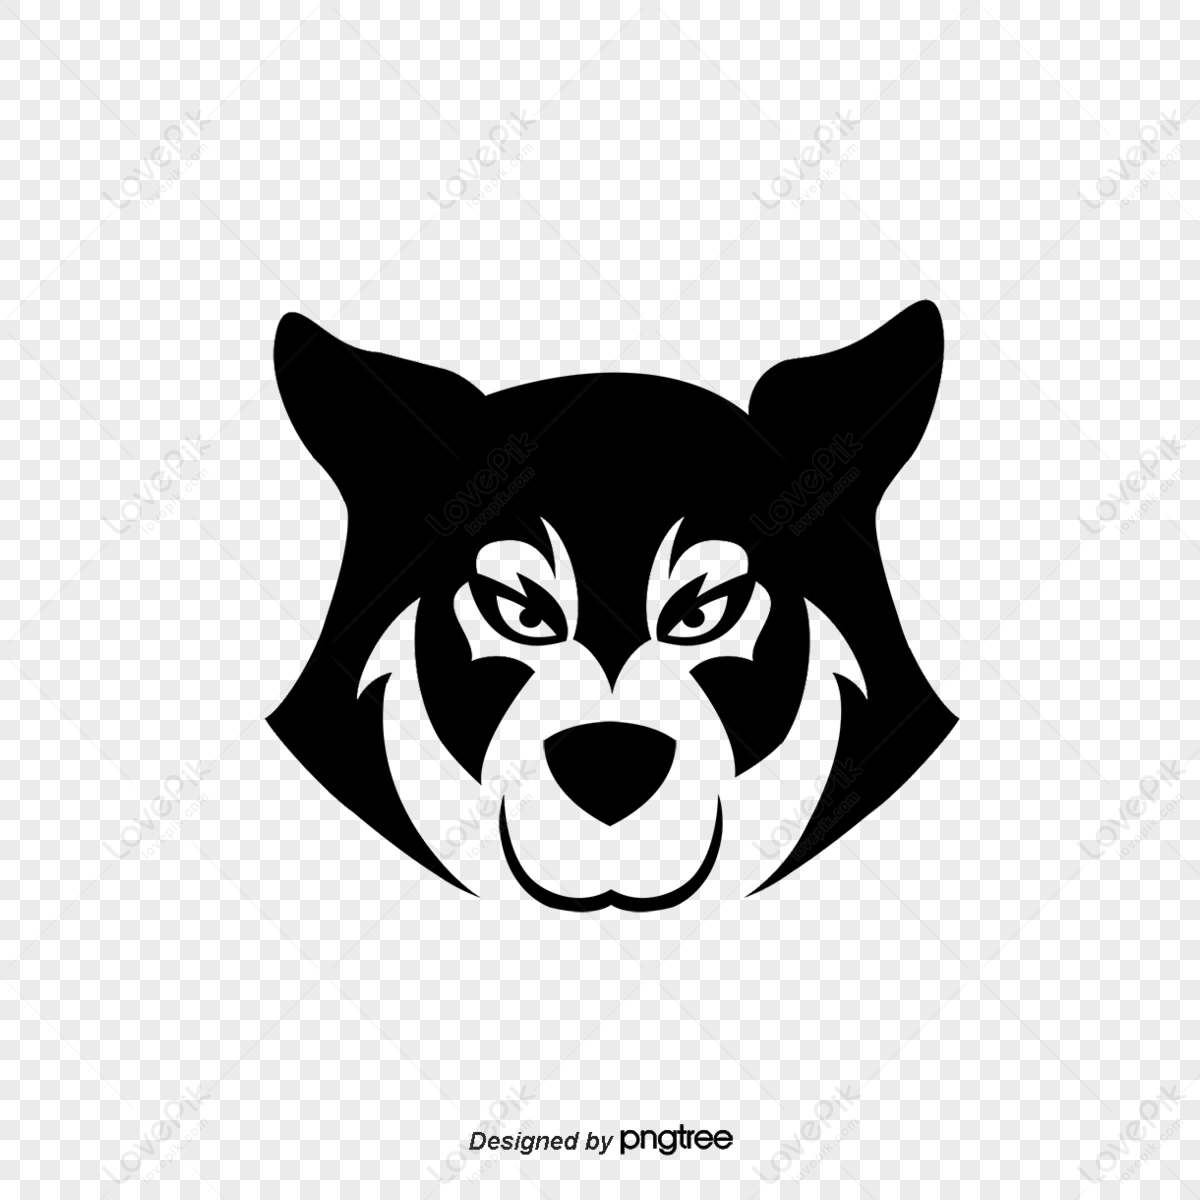 Wolf Logo Cliparts, Stock Vector and Royalty Free Wolf Logo Illustrations